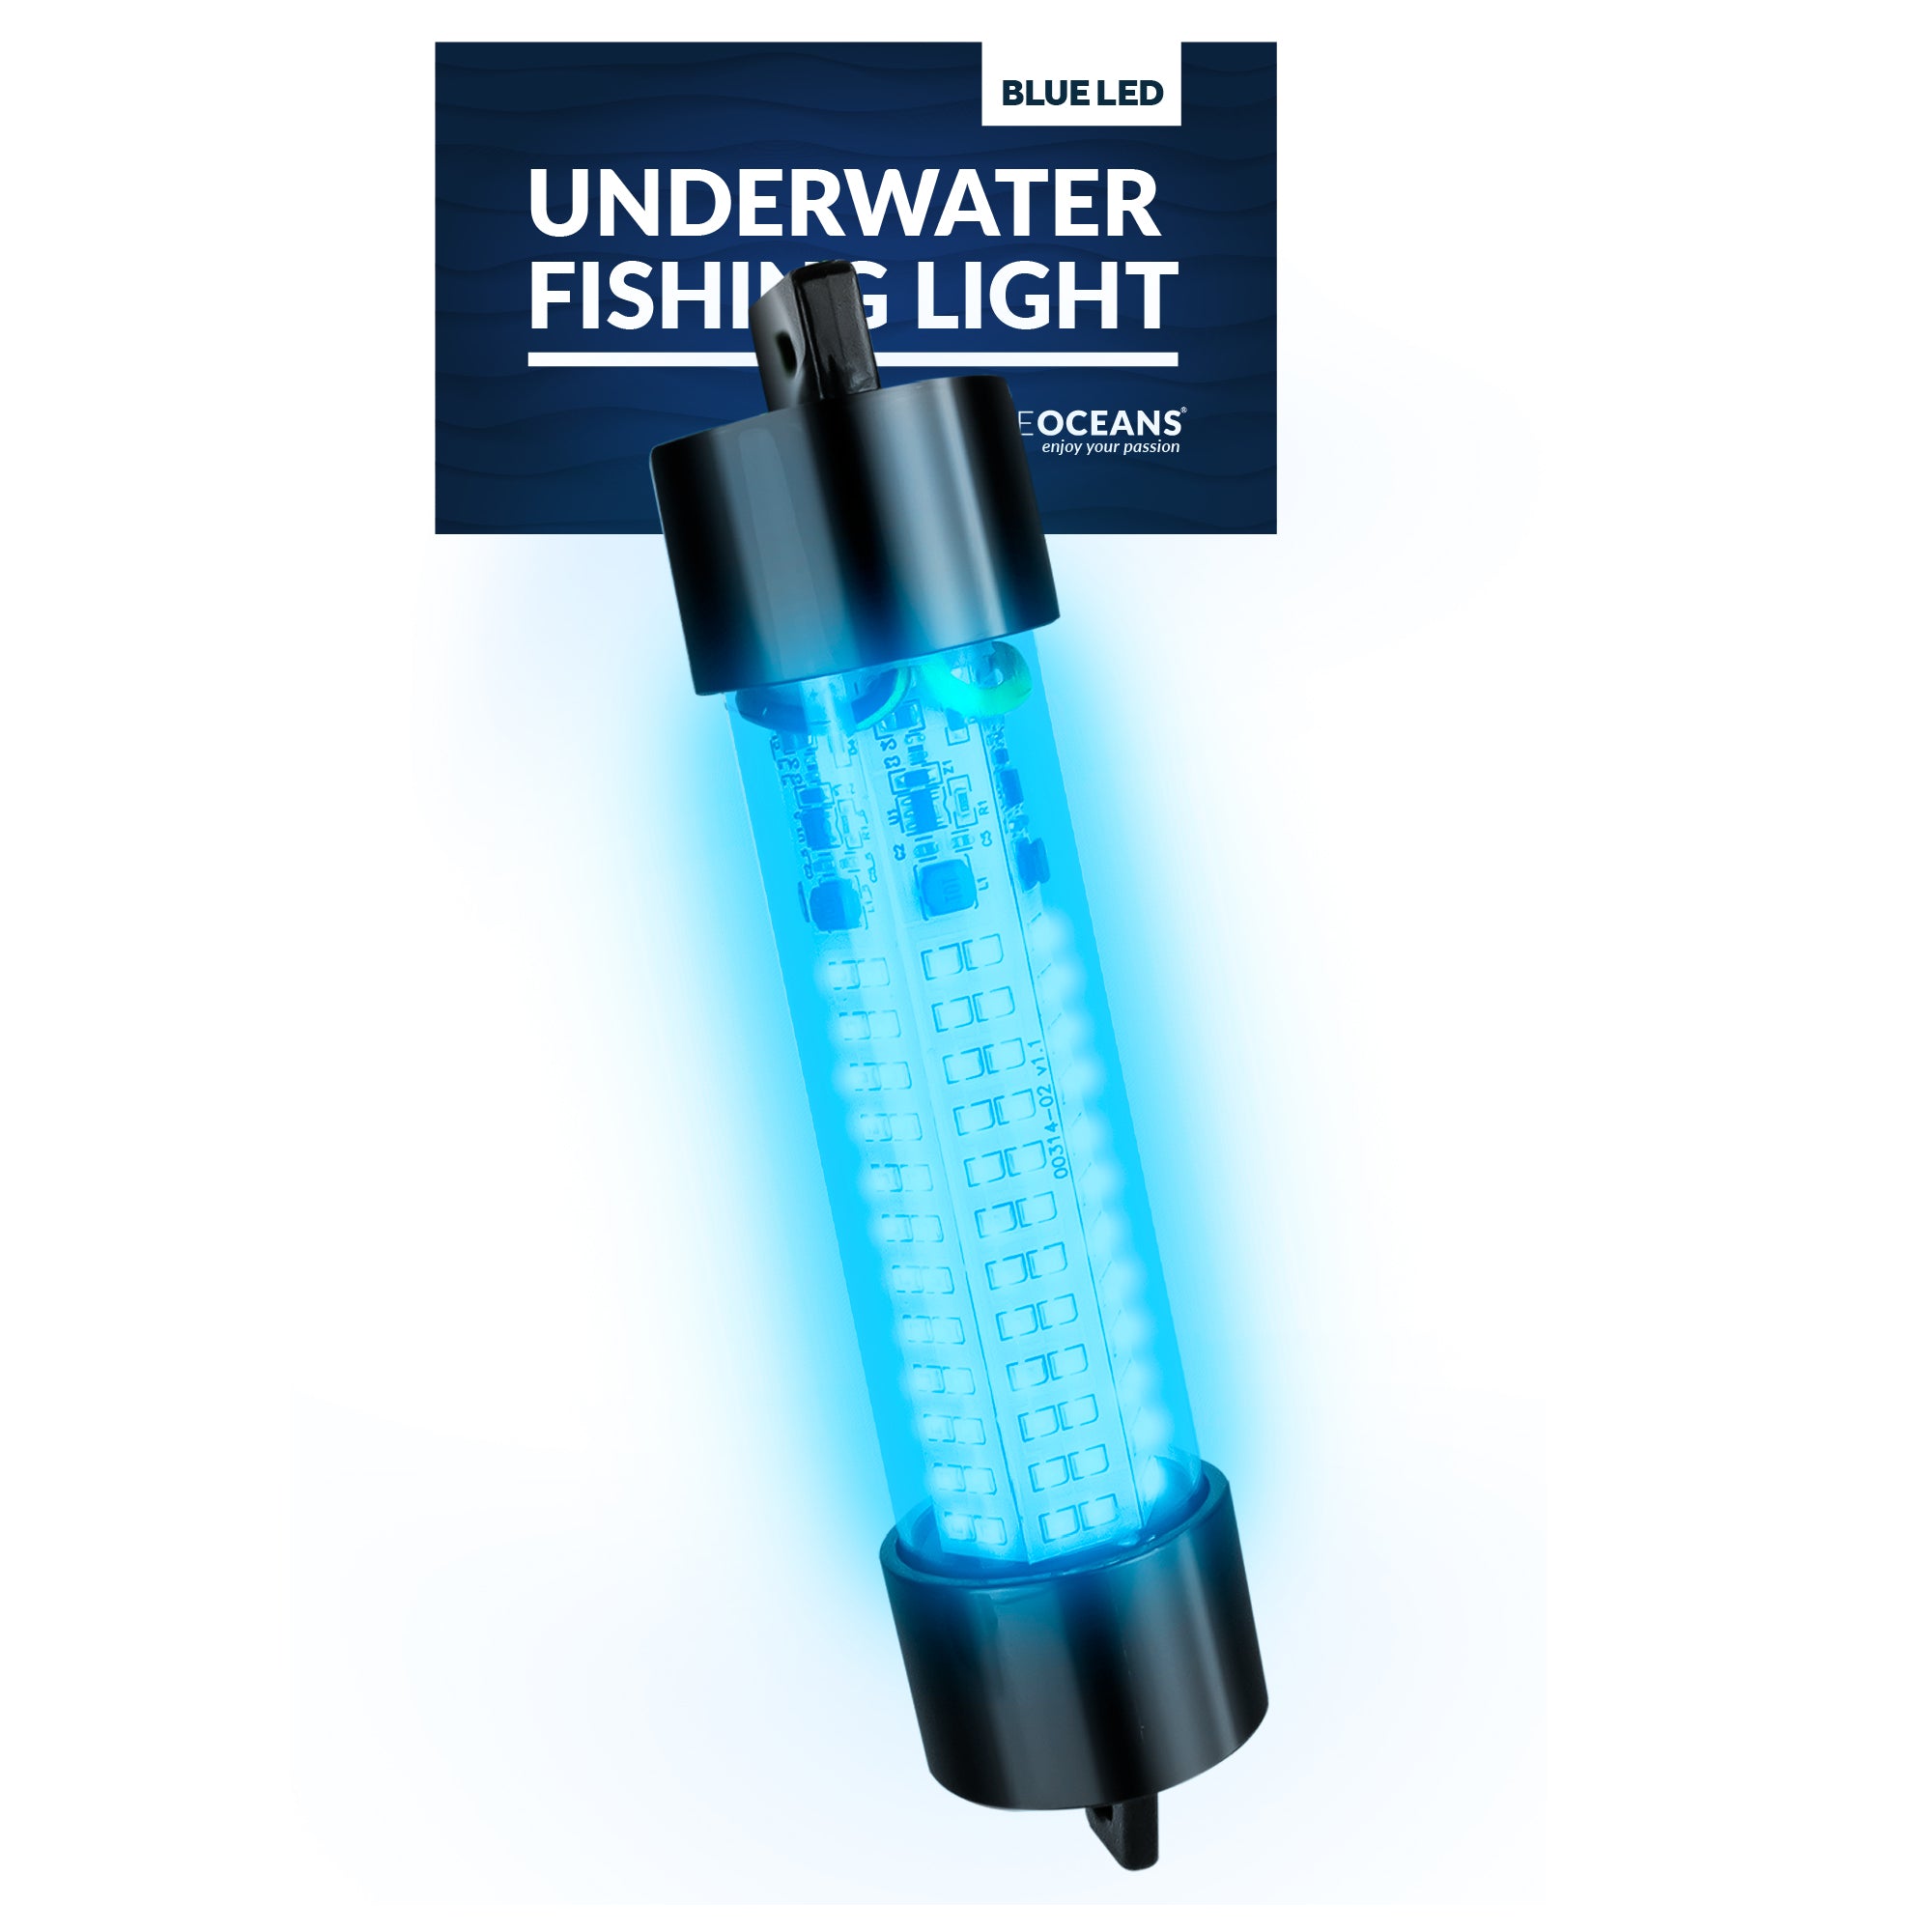 Five Oceans Blue LED Underwater Bait Finder Night Fishing Submersible Light Fo4388, Men's, Size: One Size